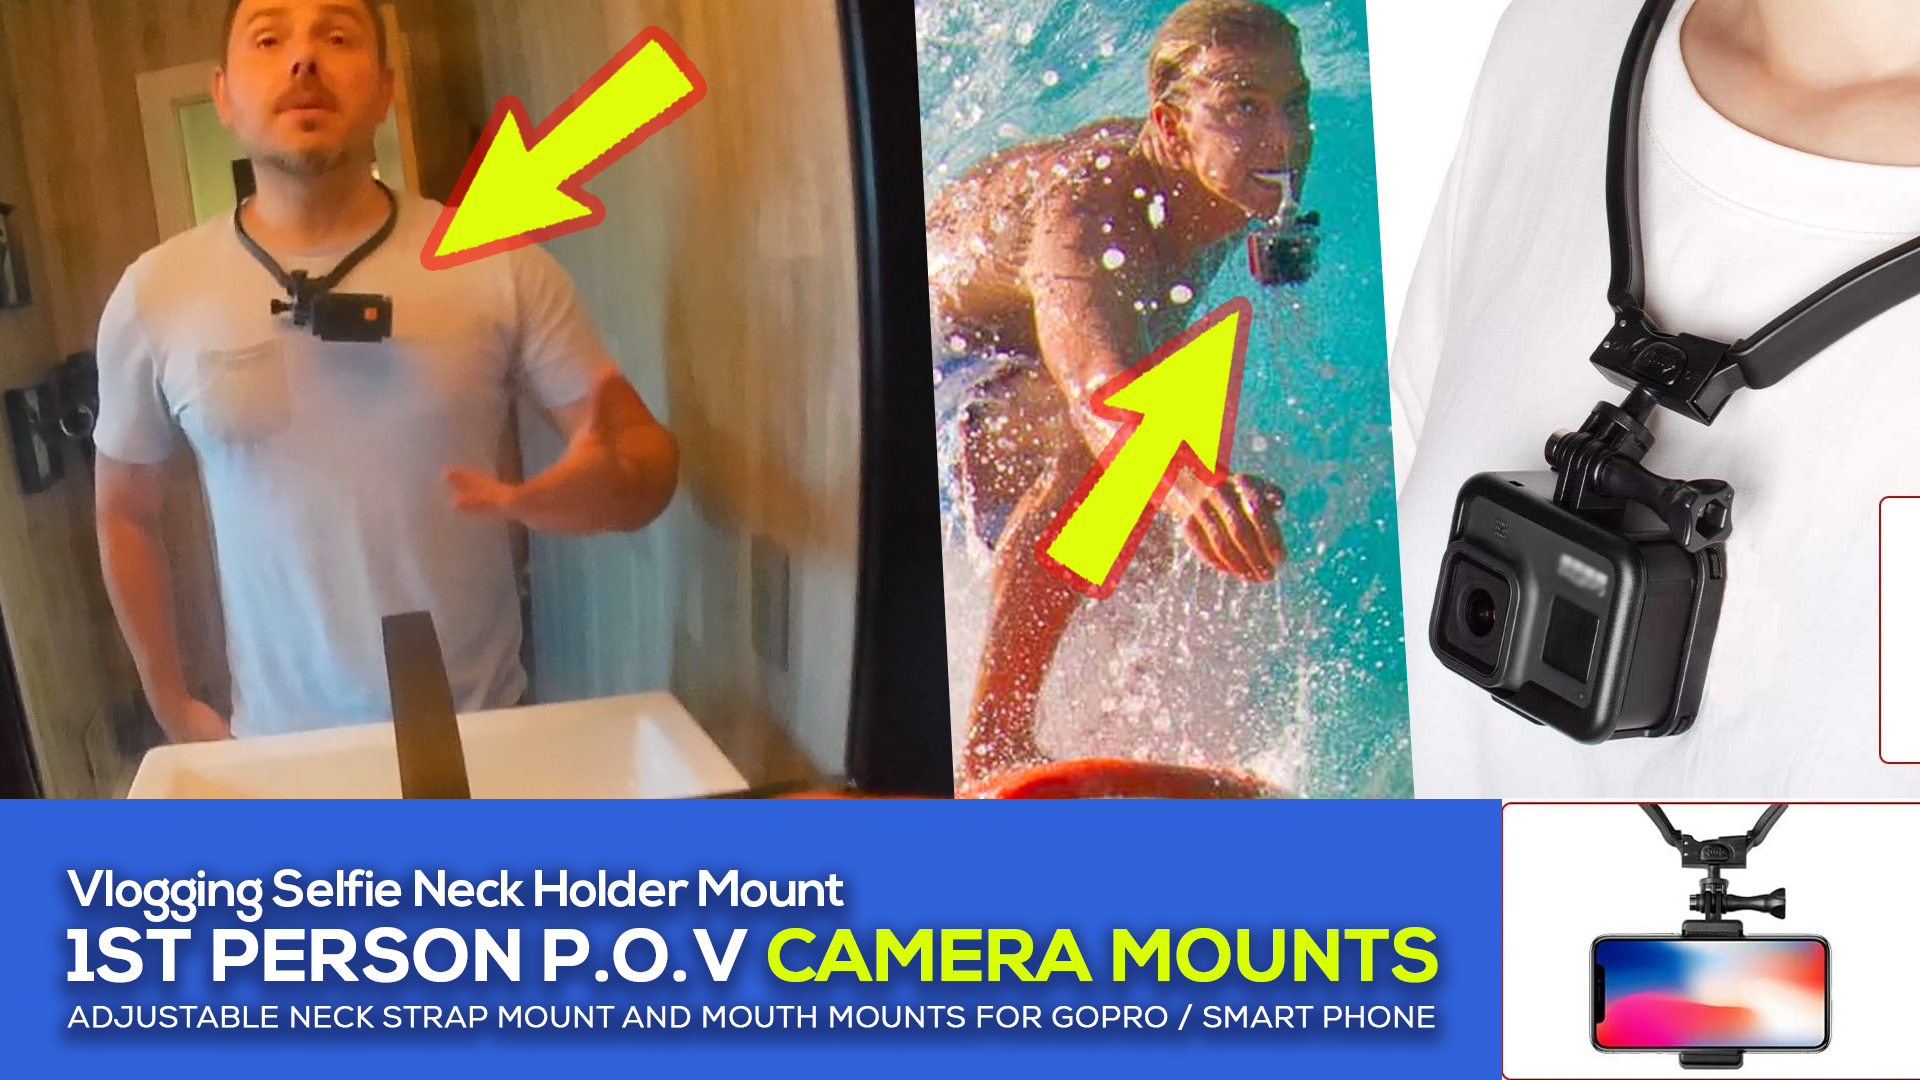 How to Mount Your GoPro for Stabilized Shoulder Video: The 15 Best Tips and Gear for Over-the-Shoulder Shooting